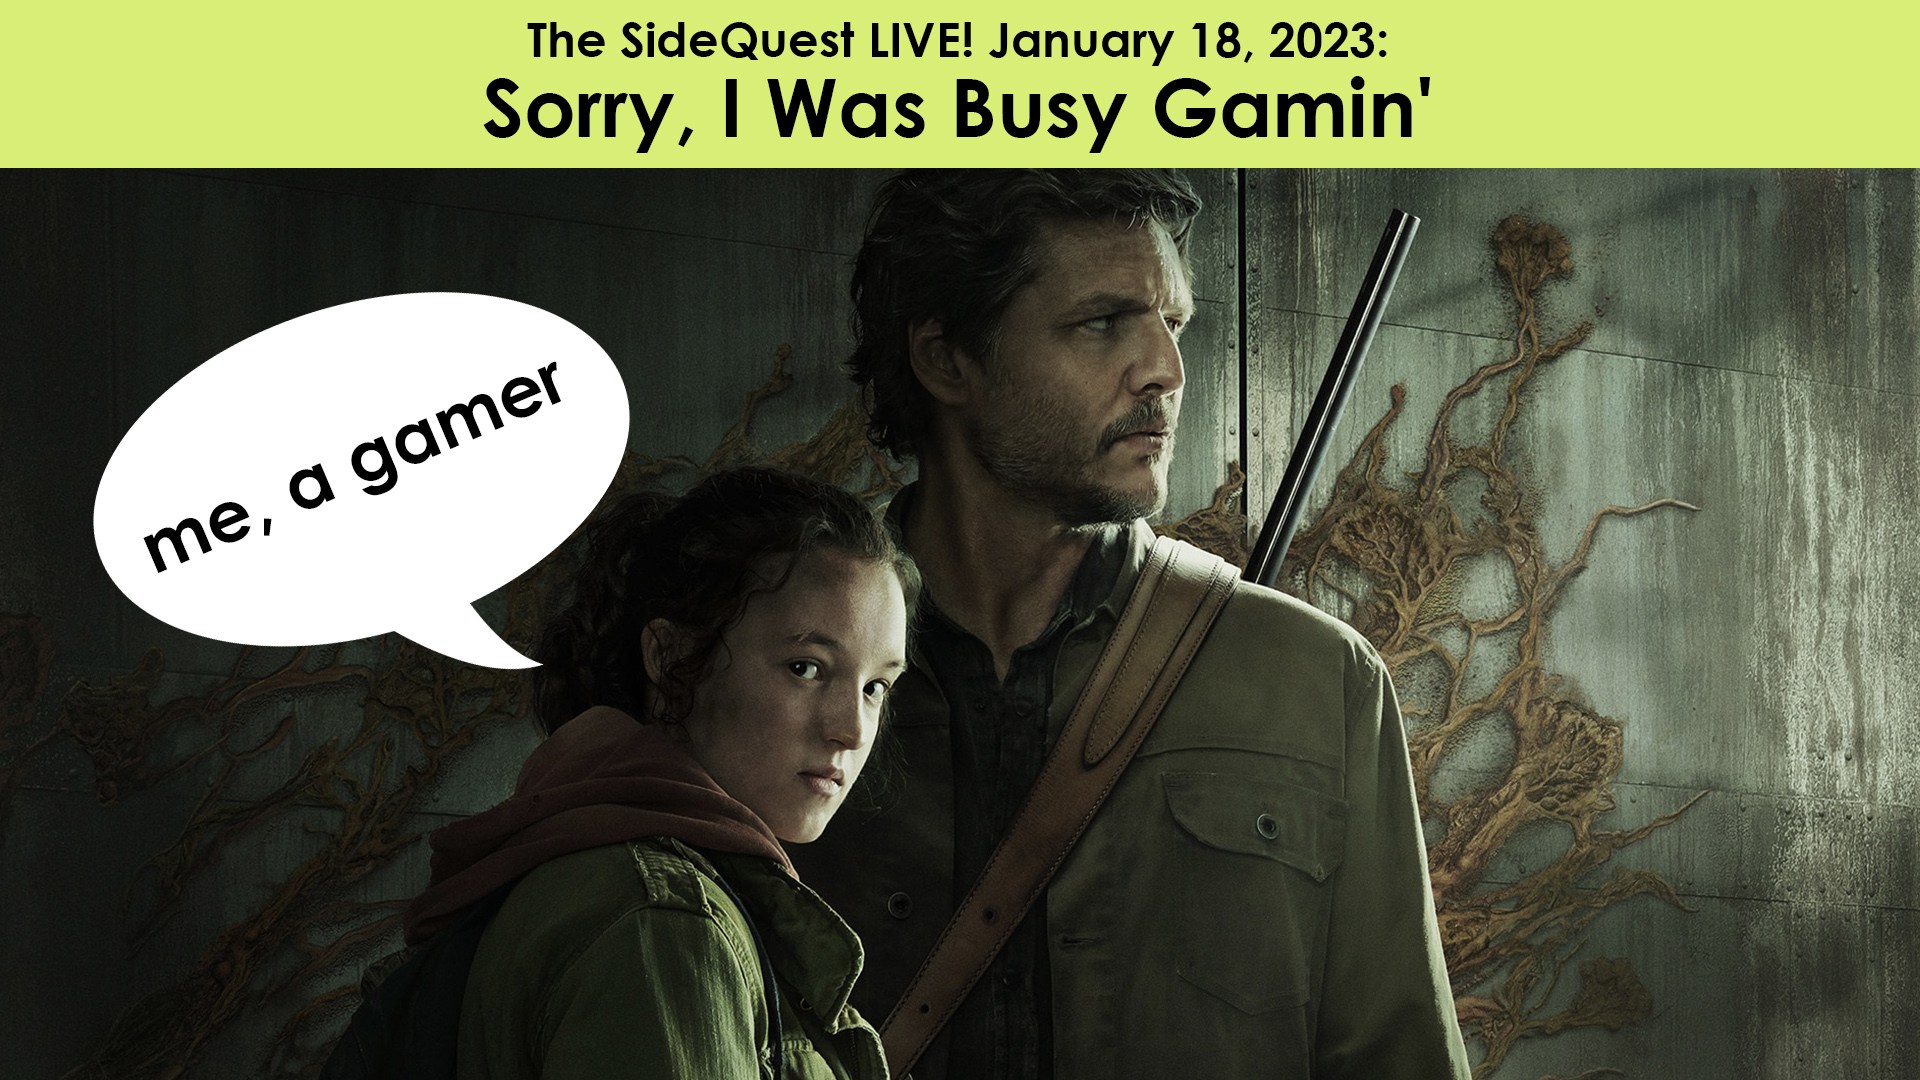 The SideQuest LIVE January 18, 2023: Sorry, I Was Busy Gamin’